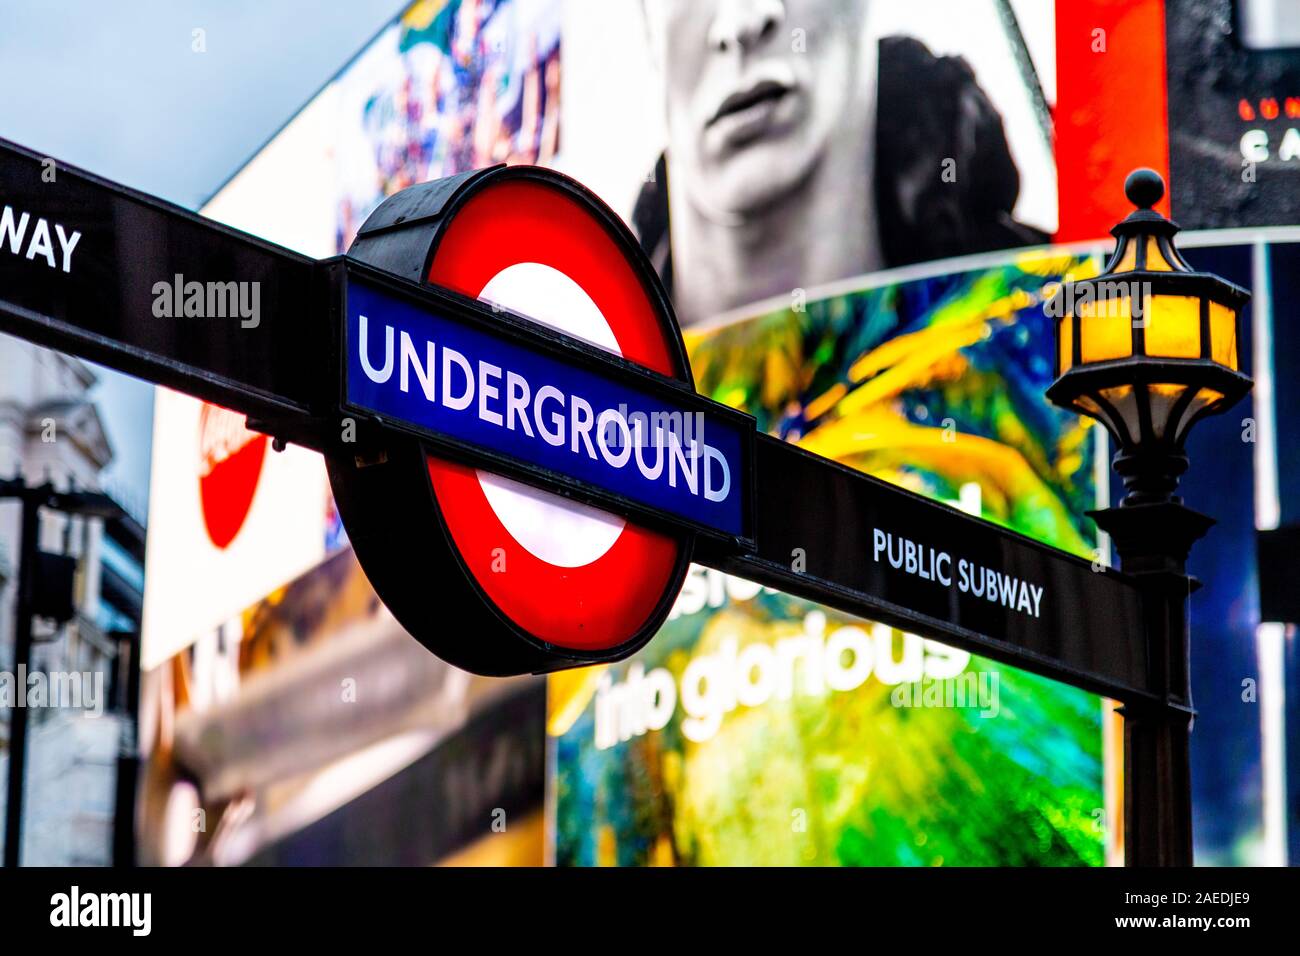 Underground tube entrance sign with the advertising screen in the background at Piccadilly Circus, London, UK Stock Photo